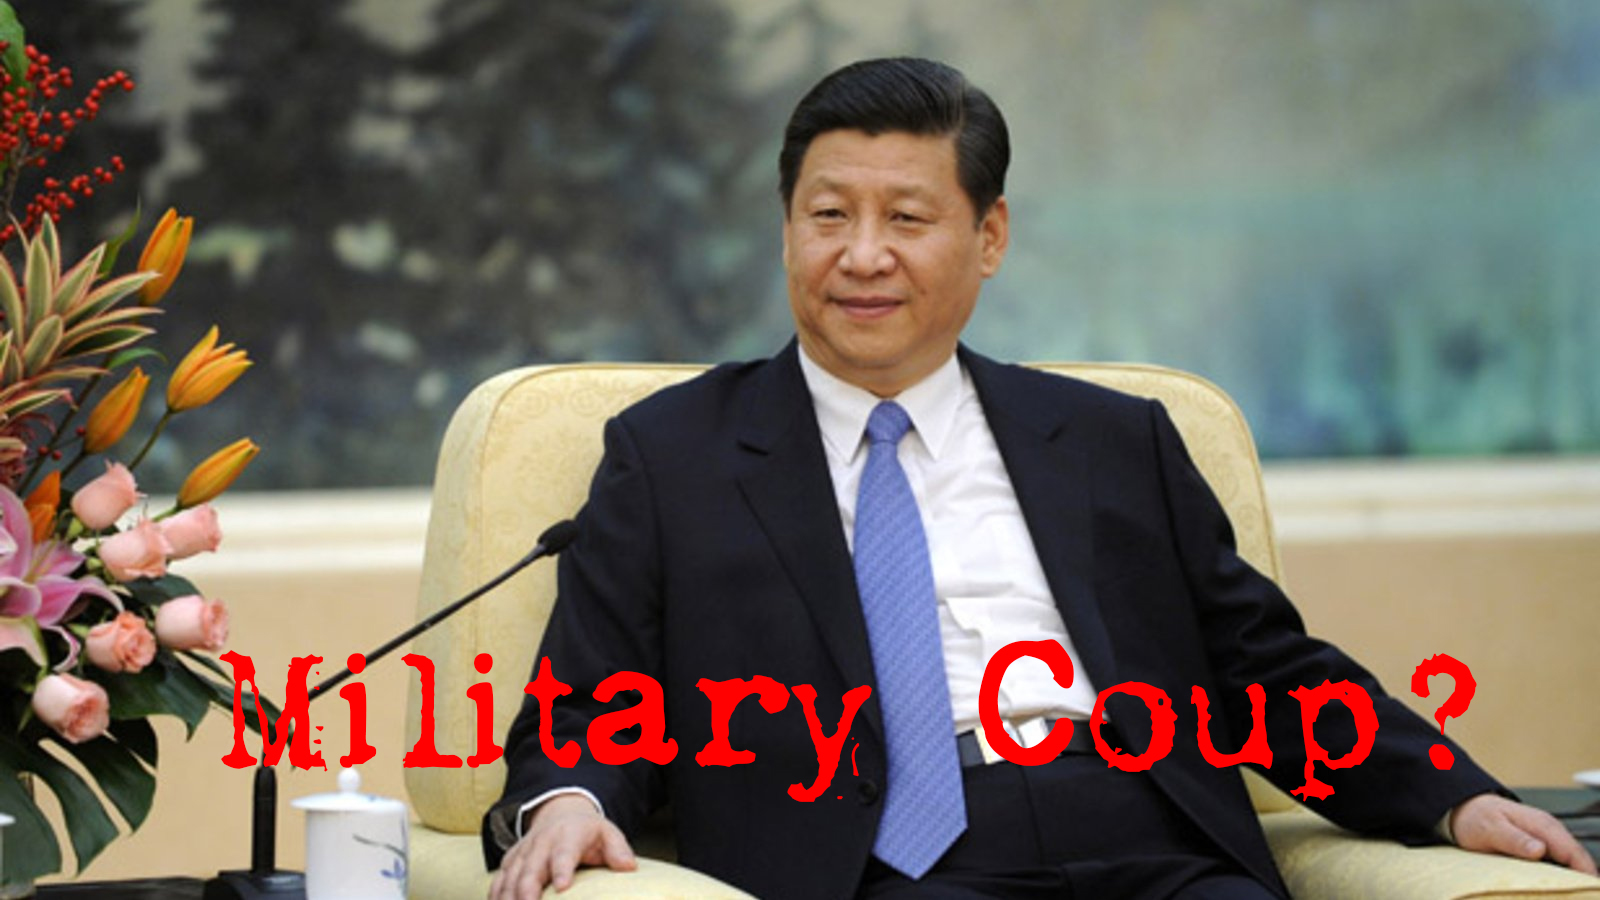 Rumours of military coup in China and arrest of Xi Jinping turns out to be false